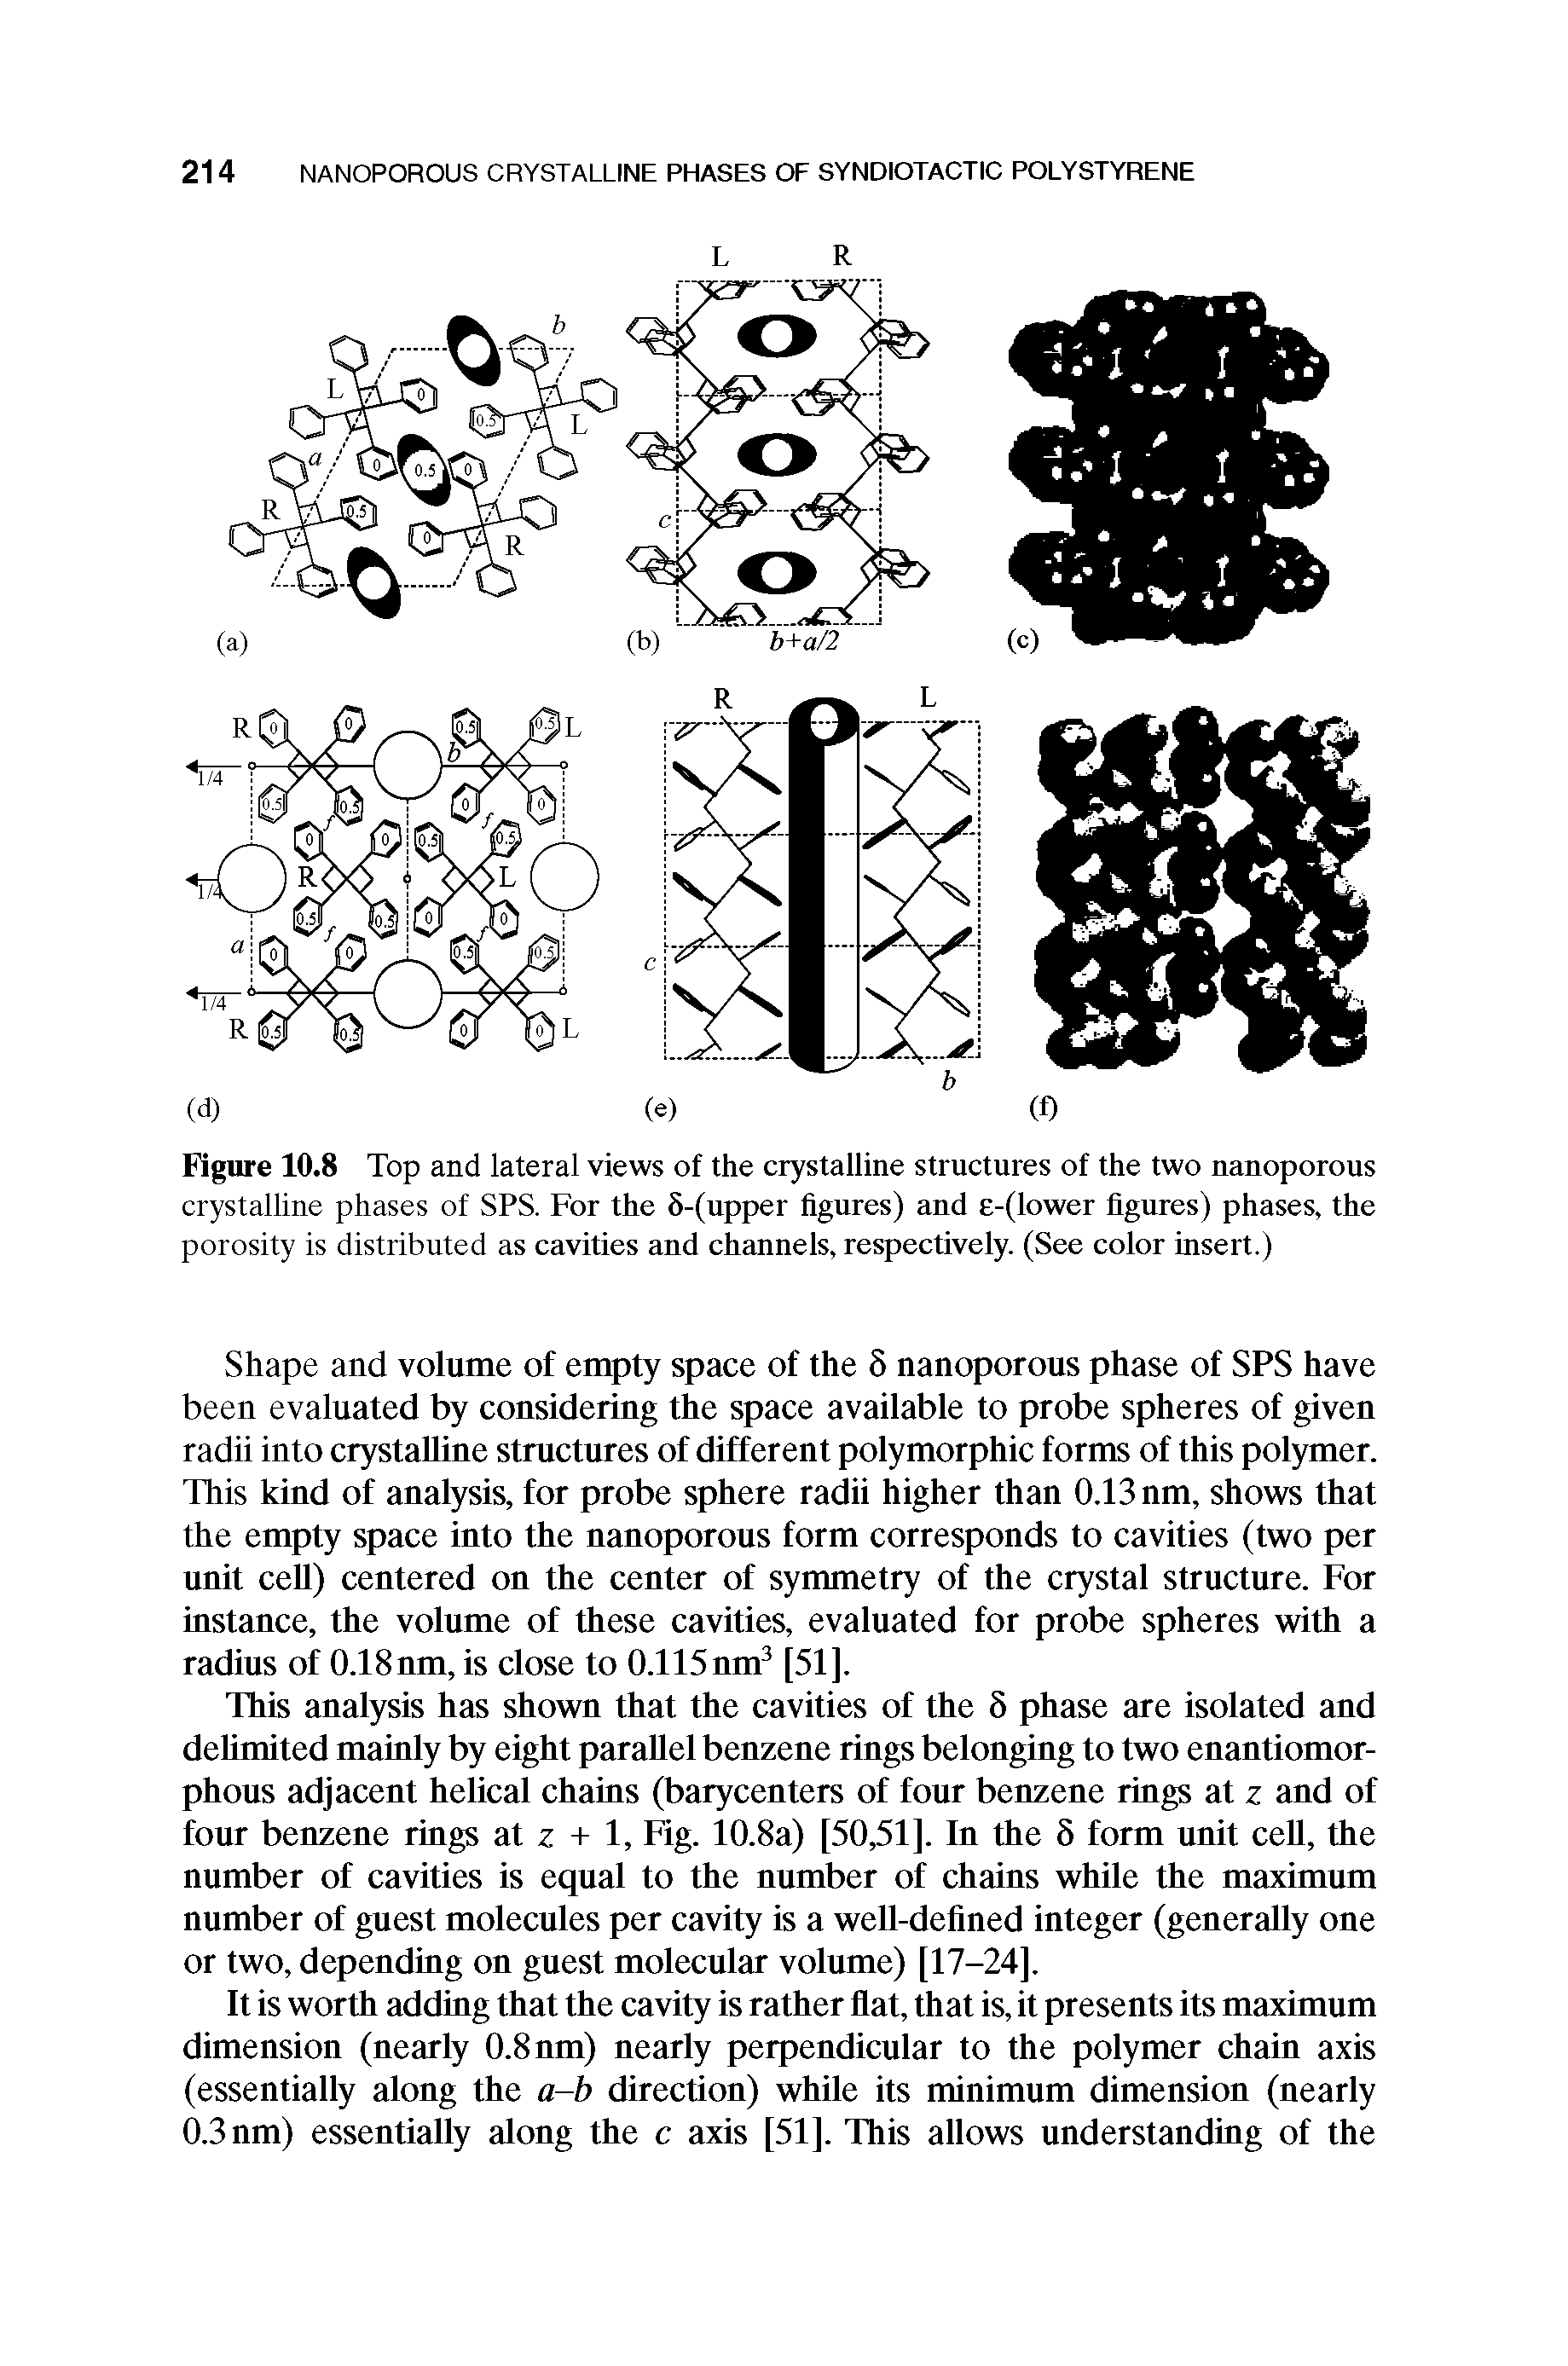 Figure 10.8 Top and lateral views of the crystalline structures of the two nanoporous crystalline phases of SPS. For the 6-(upper figures) and e-(lower figures) phases, the porosity is distributed as cavities and channels, respectively. (See color insert.)...